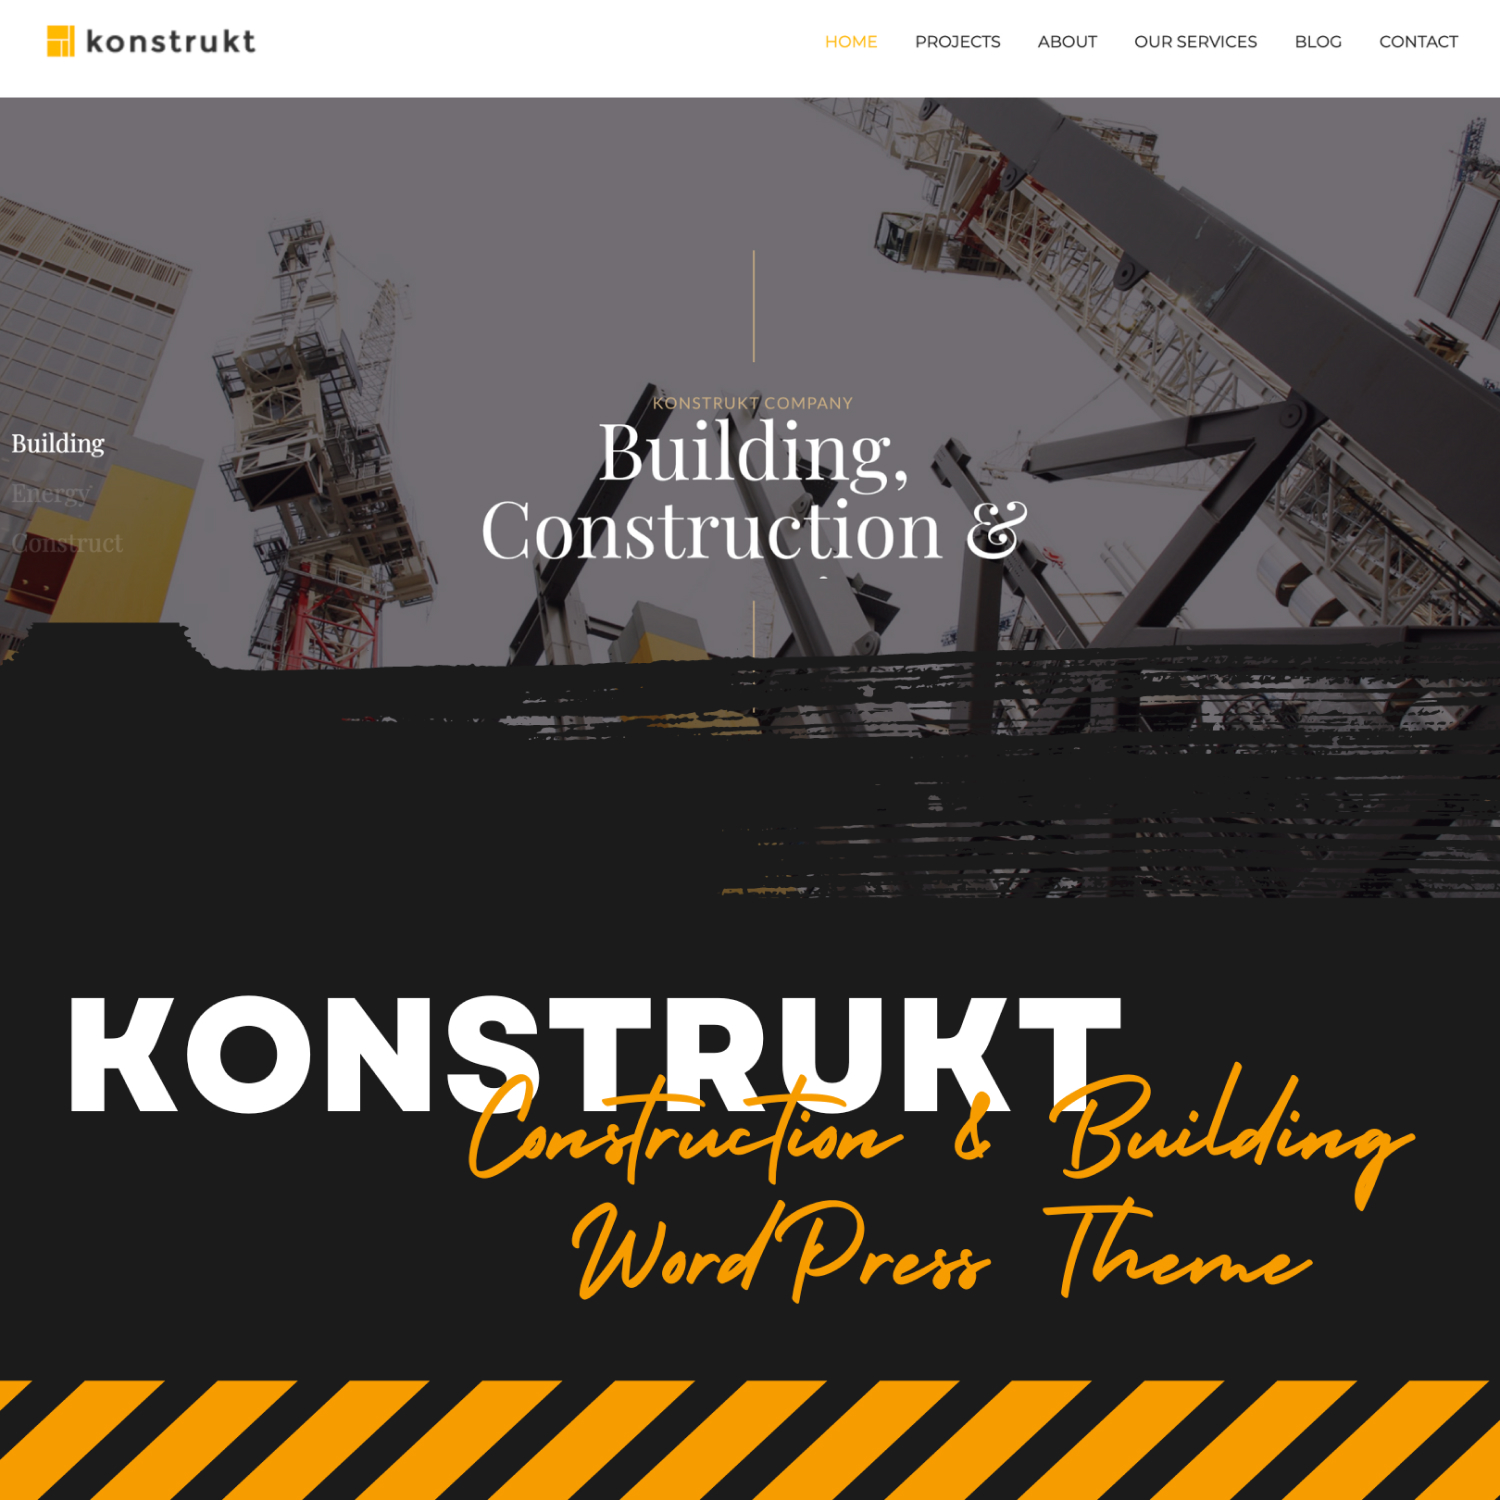 The main page is a preview of the template on the topic of construction.